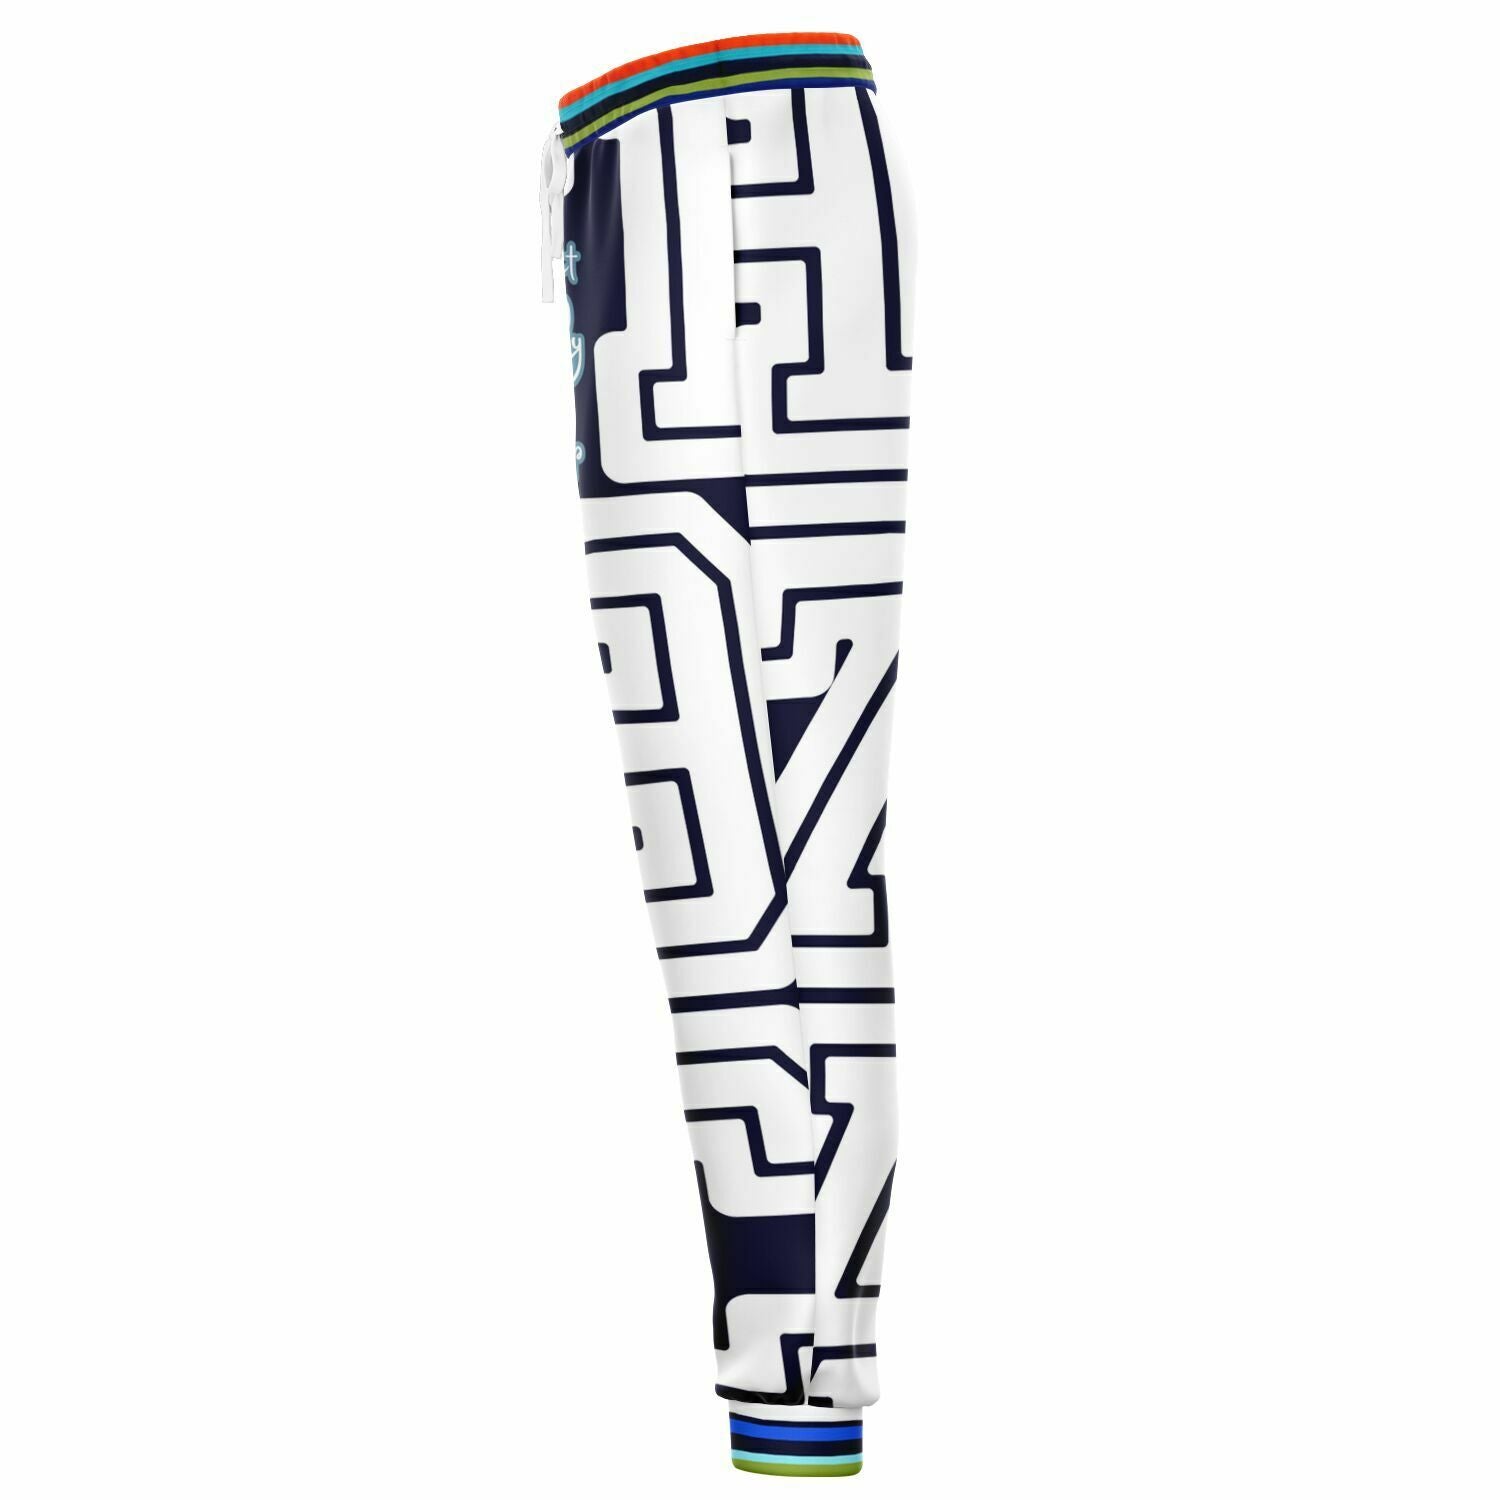 THS 1976 CA Monogram in Blue Duo Eco-Poly Unisex Joggers